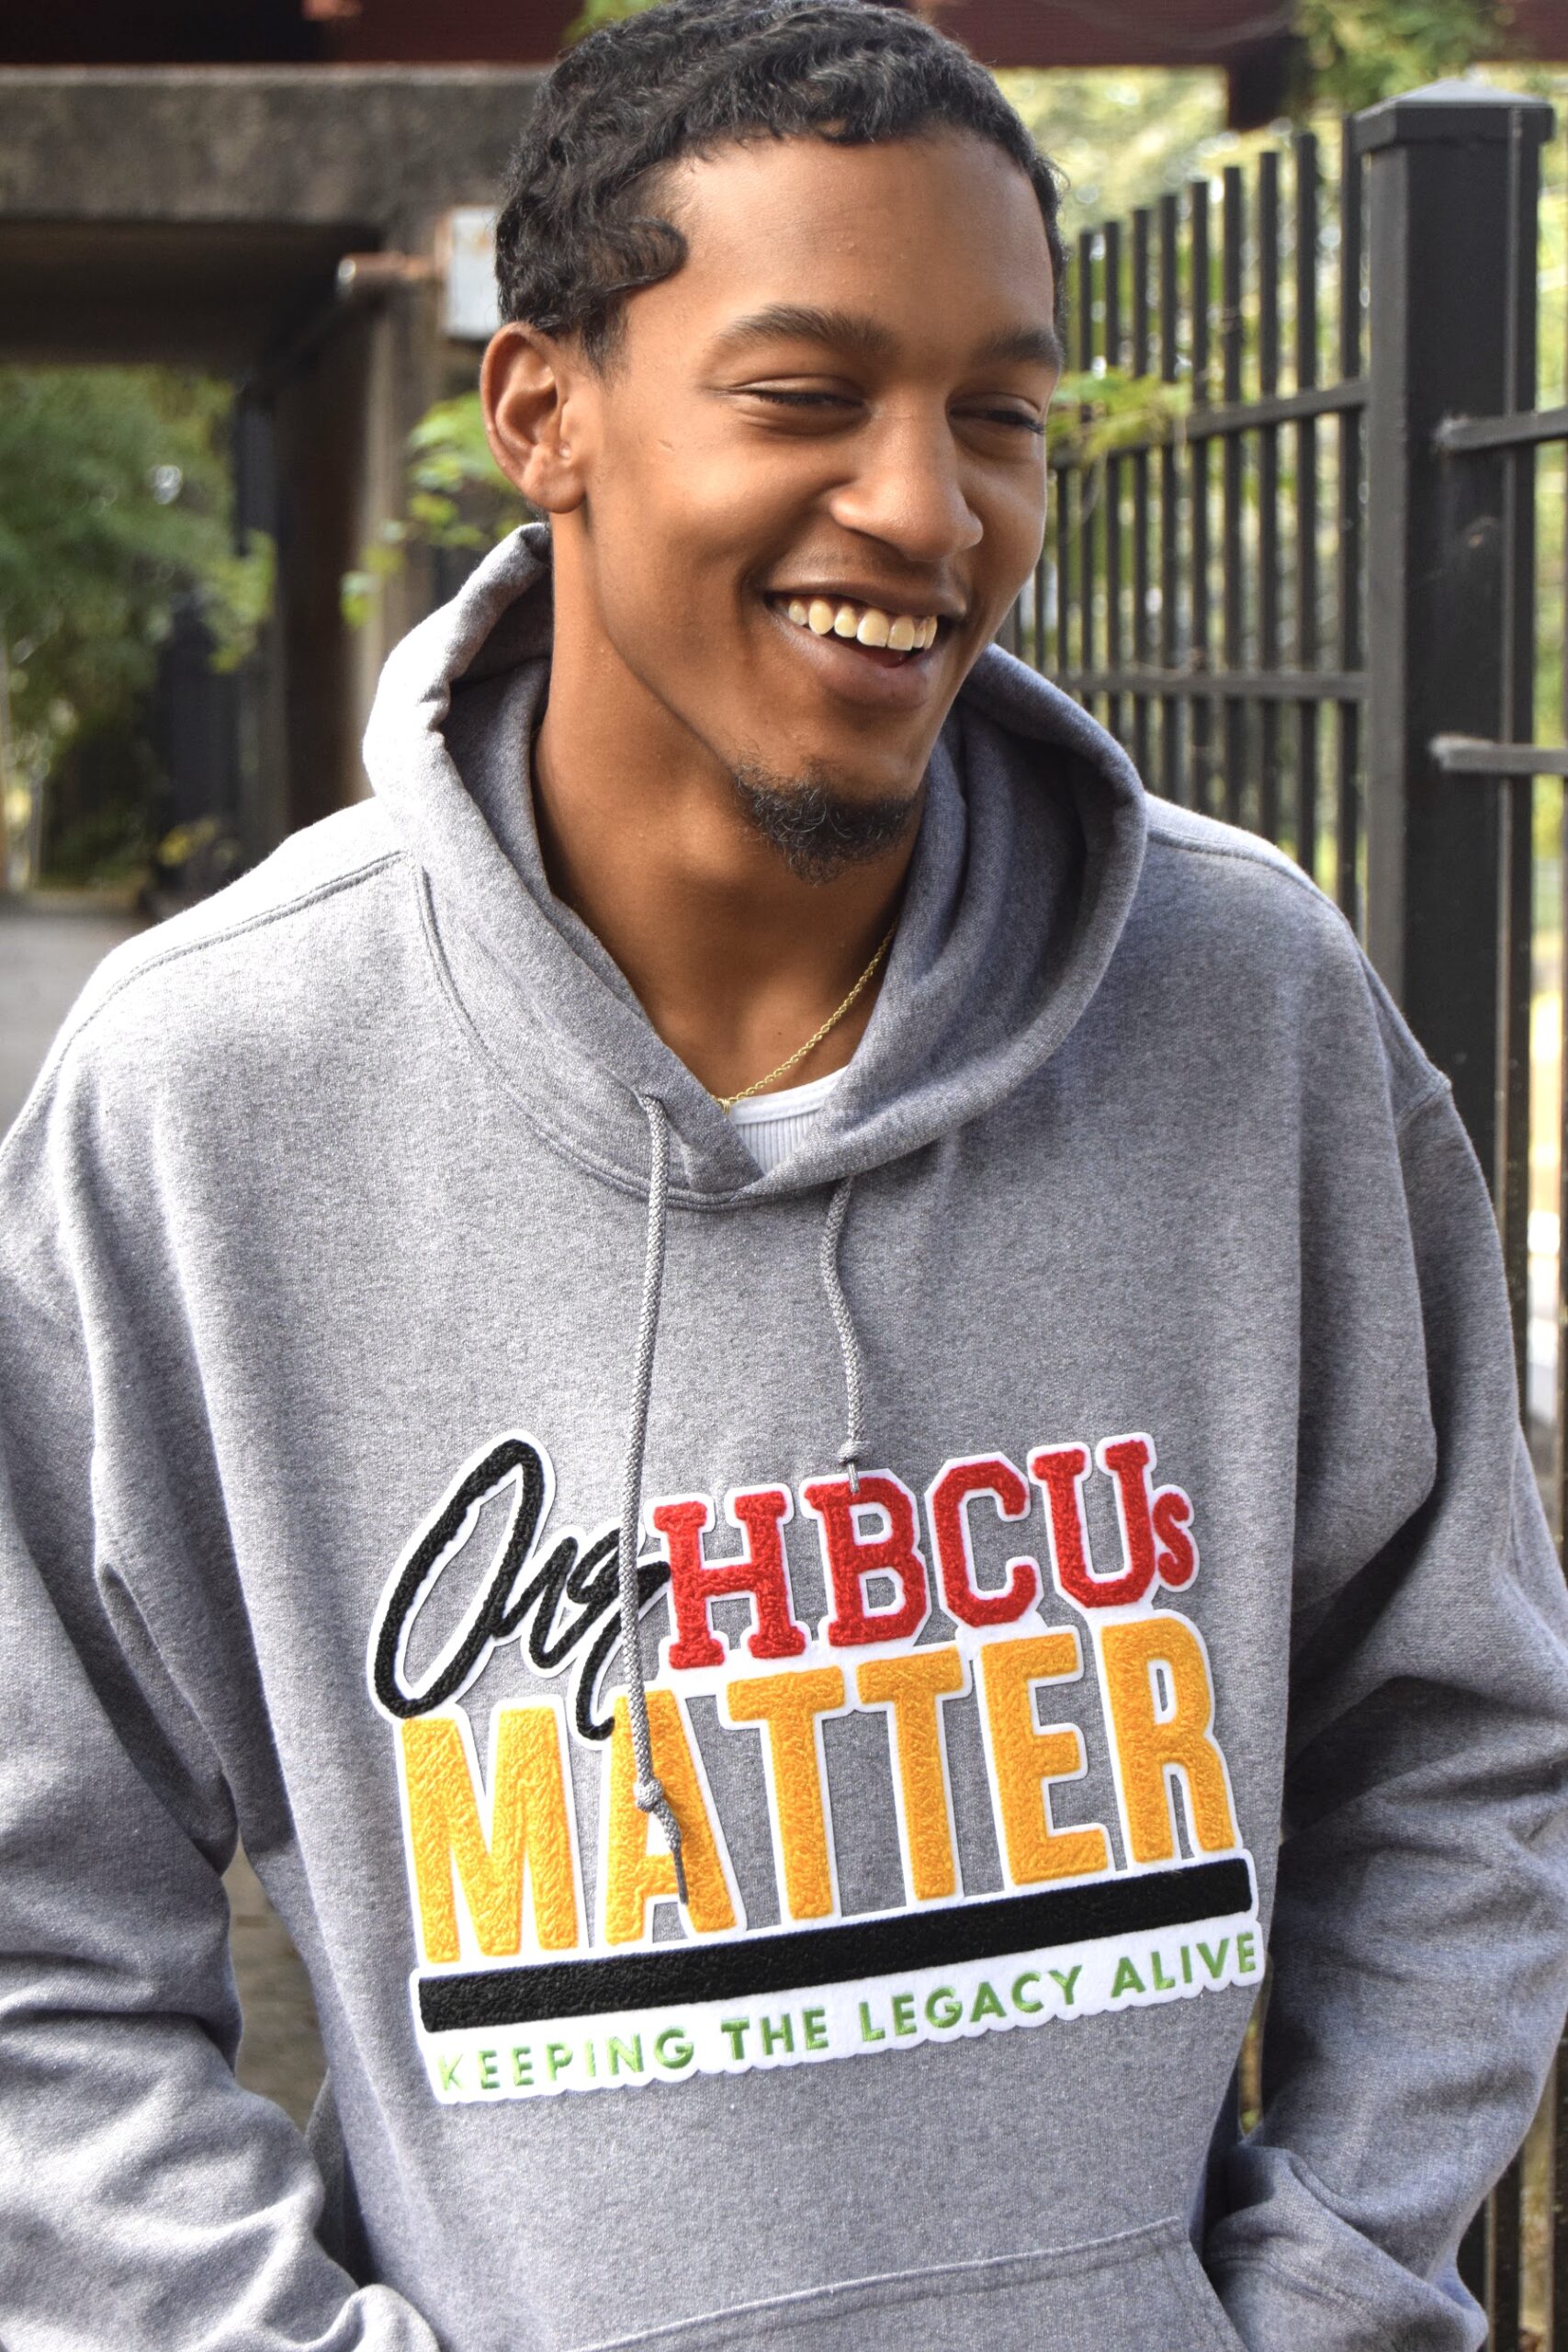 OUR HBCUS MATTERS GRAY HOODIE |UNISEX| - My HBCU Matters